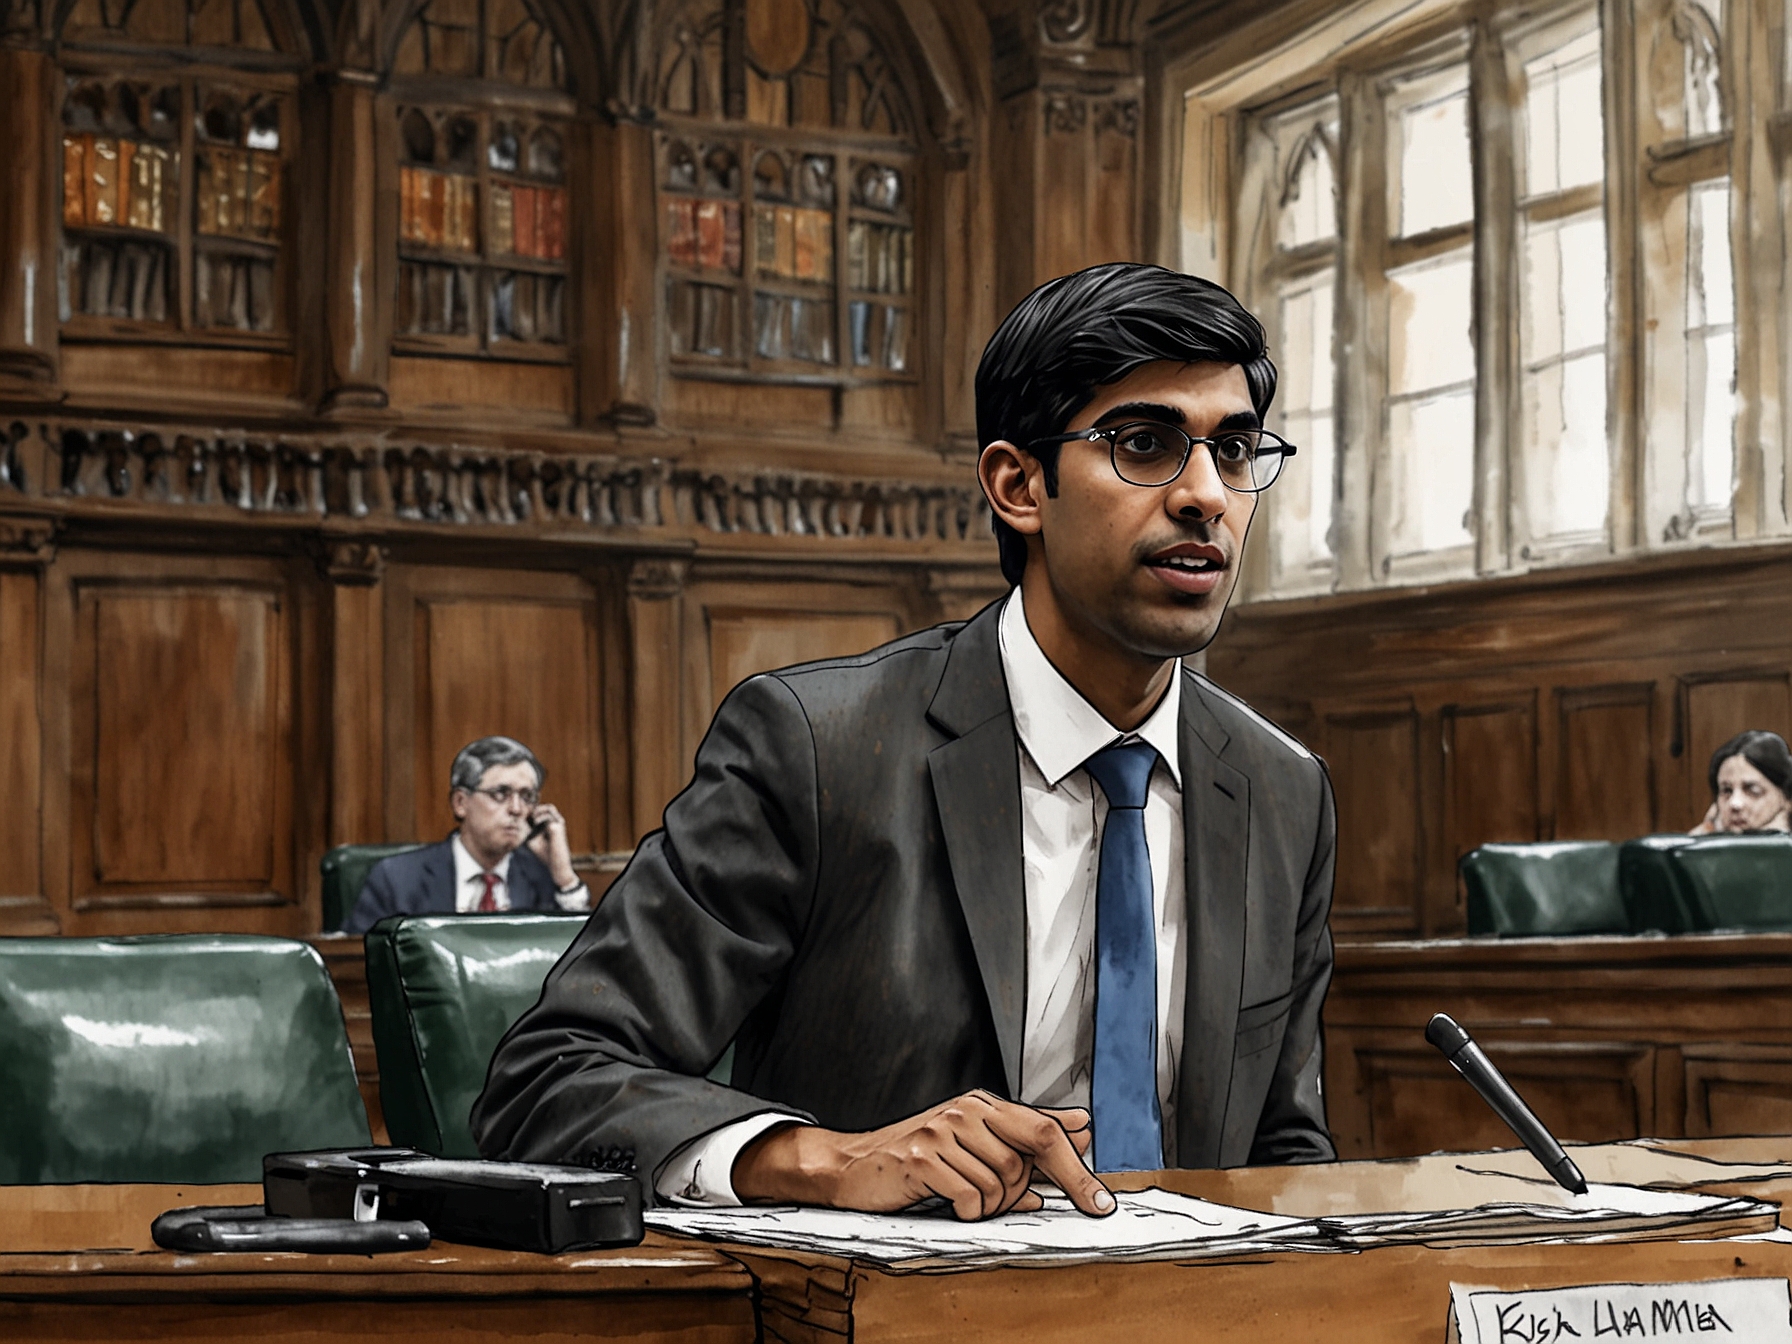 Rishi Sunak in a parliamentary session, avoiding questions from MPs about whether he informed his former aide of the general election date, raising concerns about transparency.